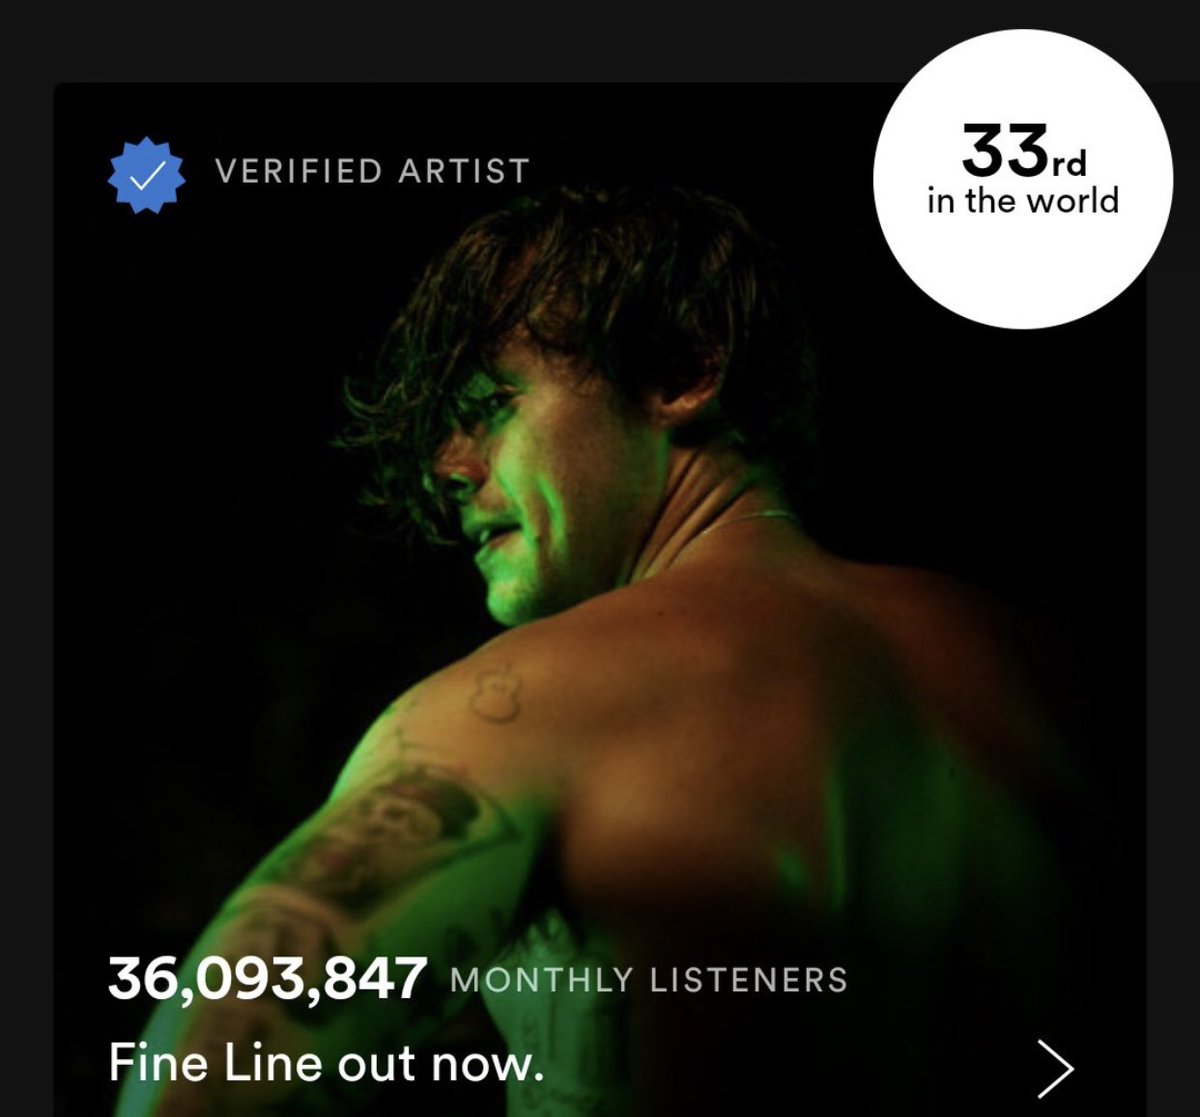 -Harry styles reached 36M monthly listeners on spotify for the first time in his career, he is currently the #33 most listened artist in the world.-"Fine Line" is ranked #3 best pop album of the year!